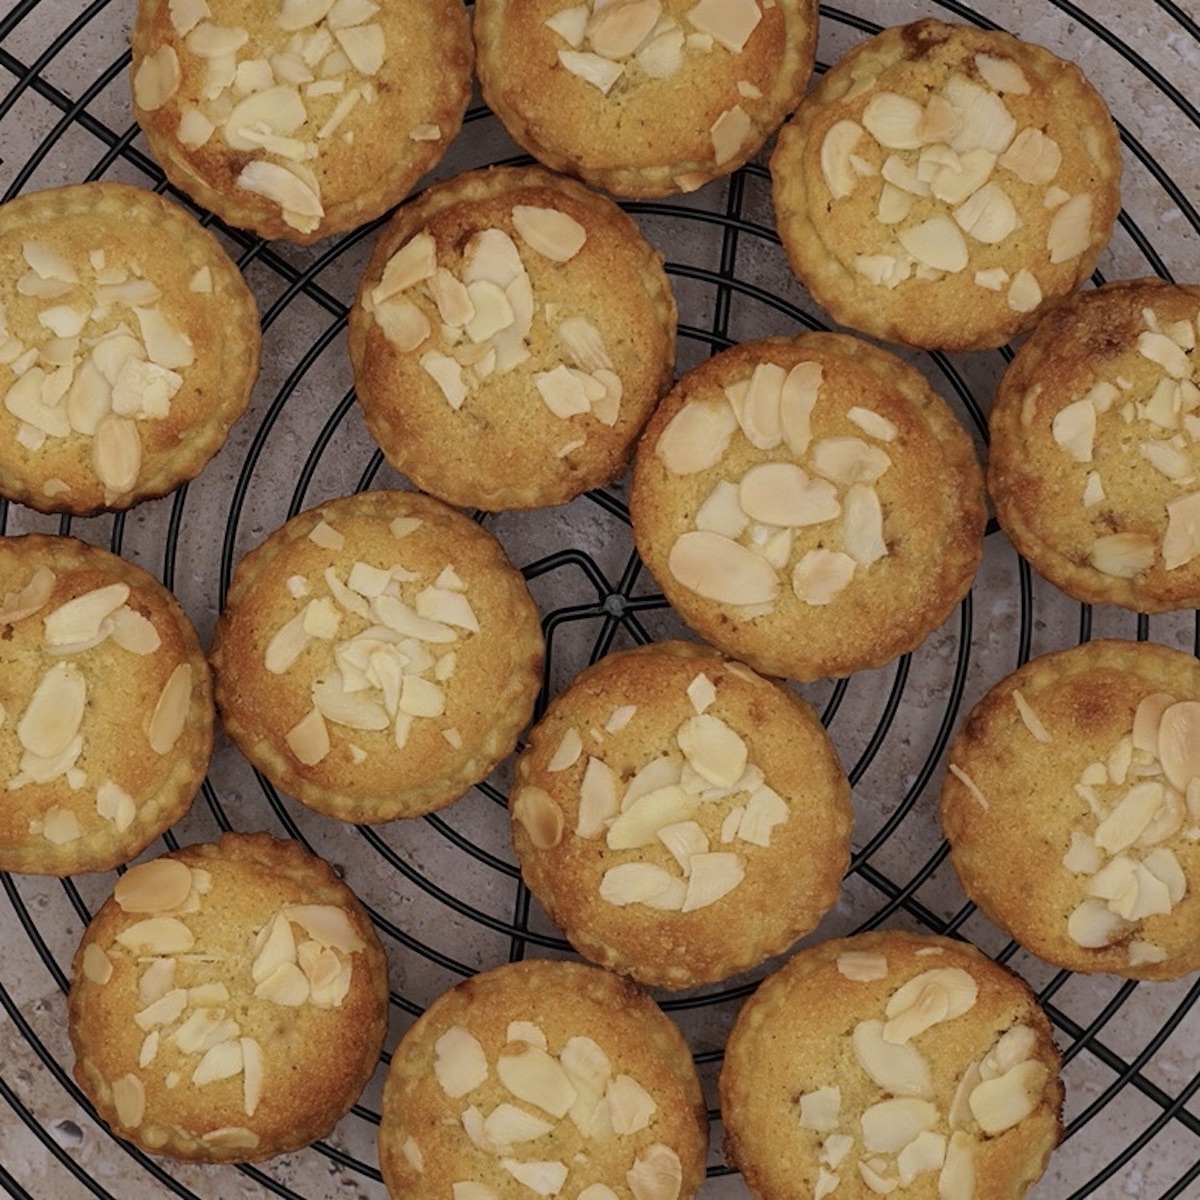 Overhead view of a group of frangipane mince pies on a wire rack.